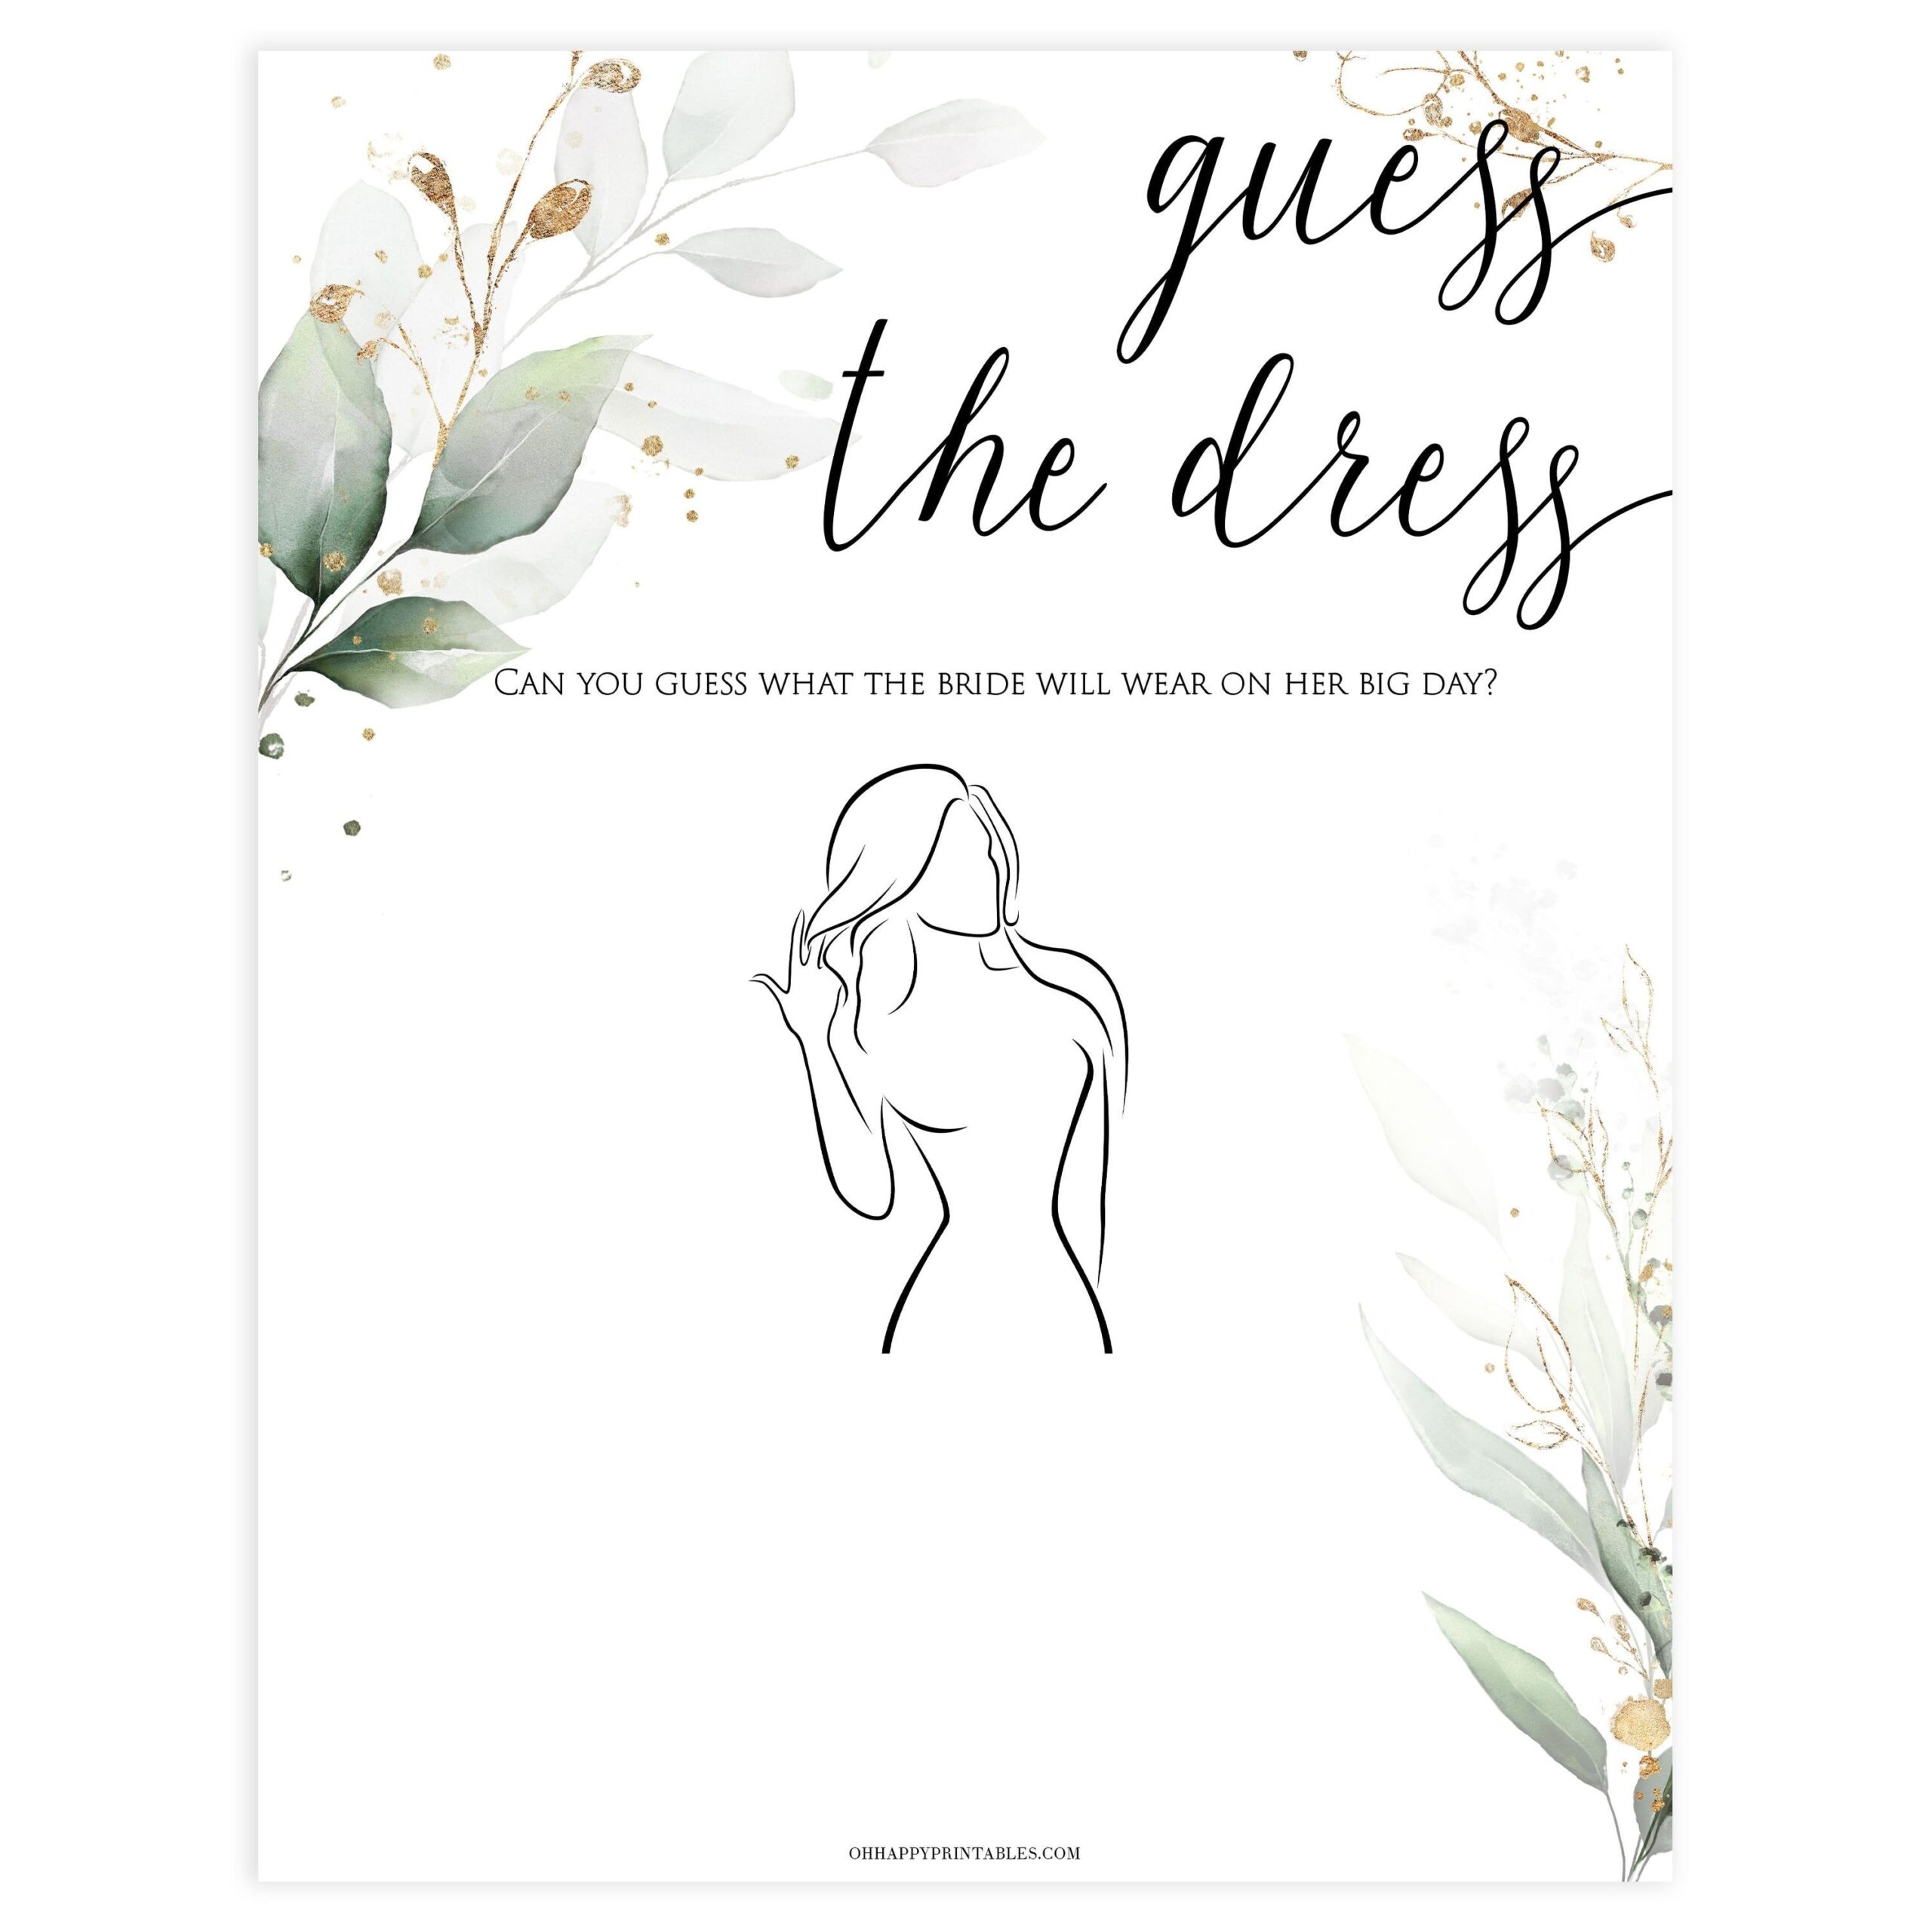 Guess The Dress Game Gold Leaf Printable Bridal Shower Games Fun Bridal Shower Games Printable Bridal Shower Games Bridal Shower Games